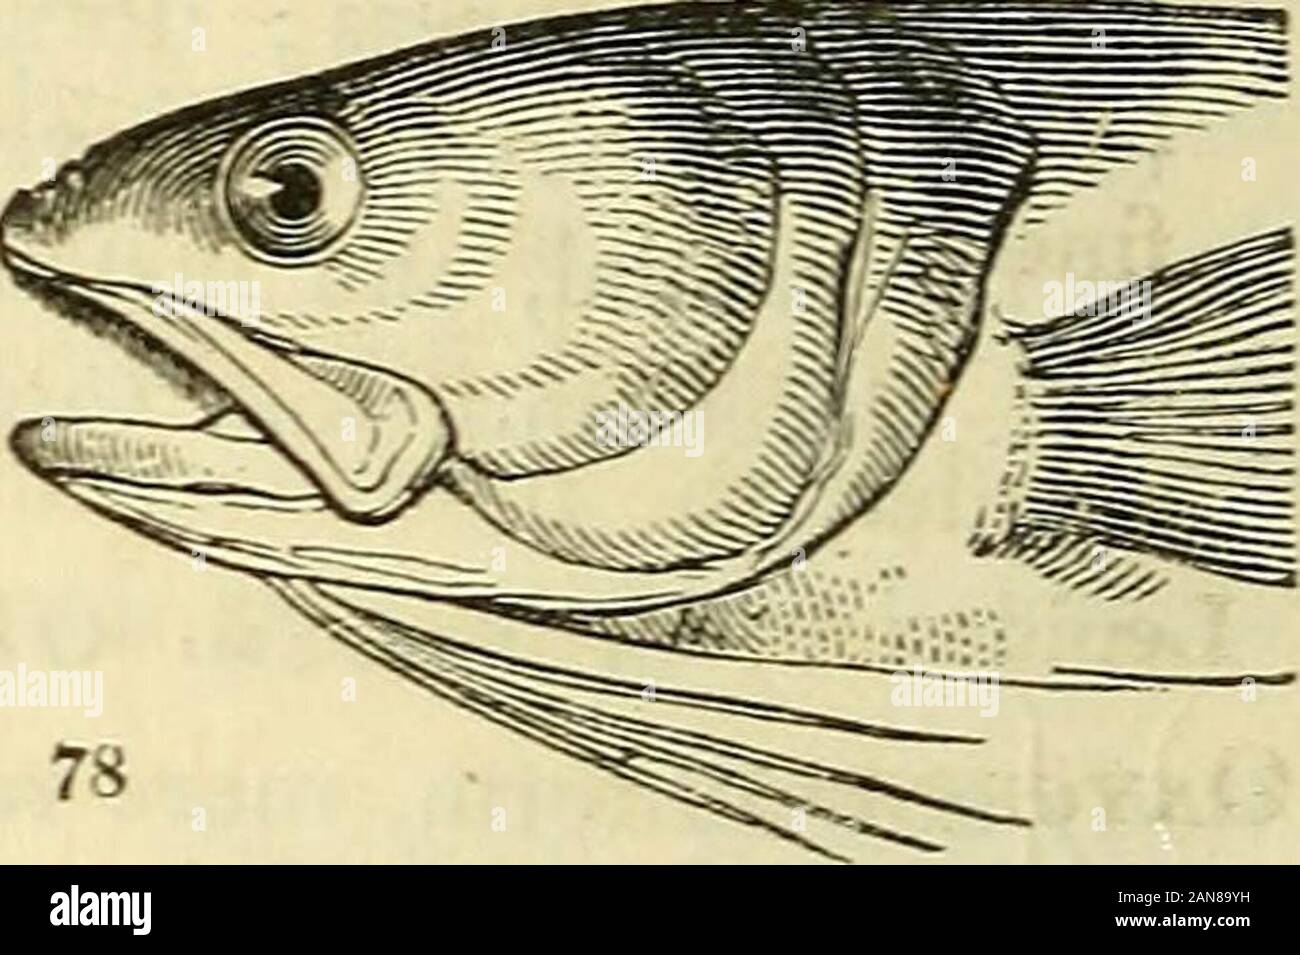 The natural history of fishes, amphibians, & reptiles, or monocardian animals . maculatus. Sw. App.. acus. Risso, L 82. pi. 4. 11. Ophidium Linn. (fig.JS.^Body anguilliform, o-paque; eyes very large;throat furnished withcirri,barbatum. Bl. 159.* ^(/^.78.) Vassalli. Risso, Nice. Lp. 97. 5. SuBFAM. STYLEPHORIN^. Eyes pedunculated. Stylephorus Shaw. Body anguilliform, very long,compressed ; eyes pedunculated, standing on a short,thick cylinder; snout lengthened ; directed upwards,retractile towards the head ; mouth without teeth ;pectoral fins small; dorsal the length of the back j;• caudal verti Stock Photo